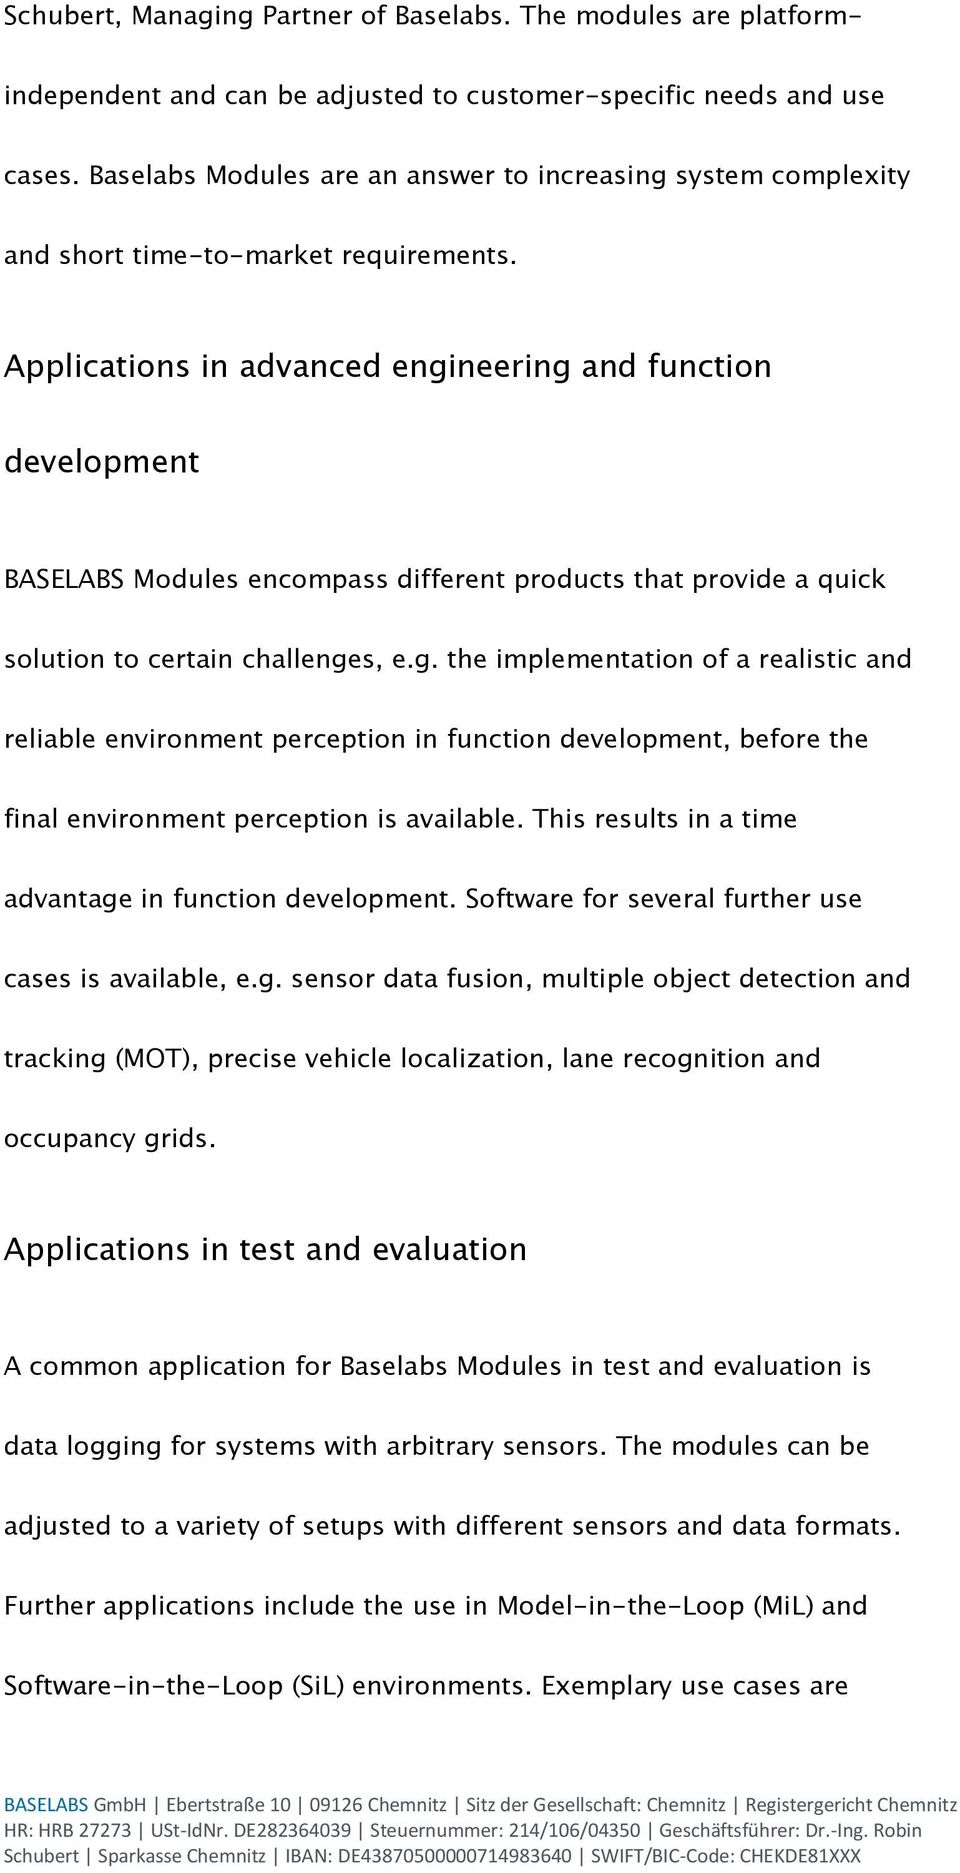 Applications in advanced engineering and function development BASELABS Modules encompass different products that provide a quick solution to certain challenges, e.g. the implementation of a realistic and reliable environment perception in function development, before the final environment perception is available.